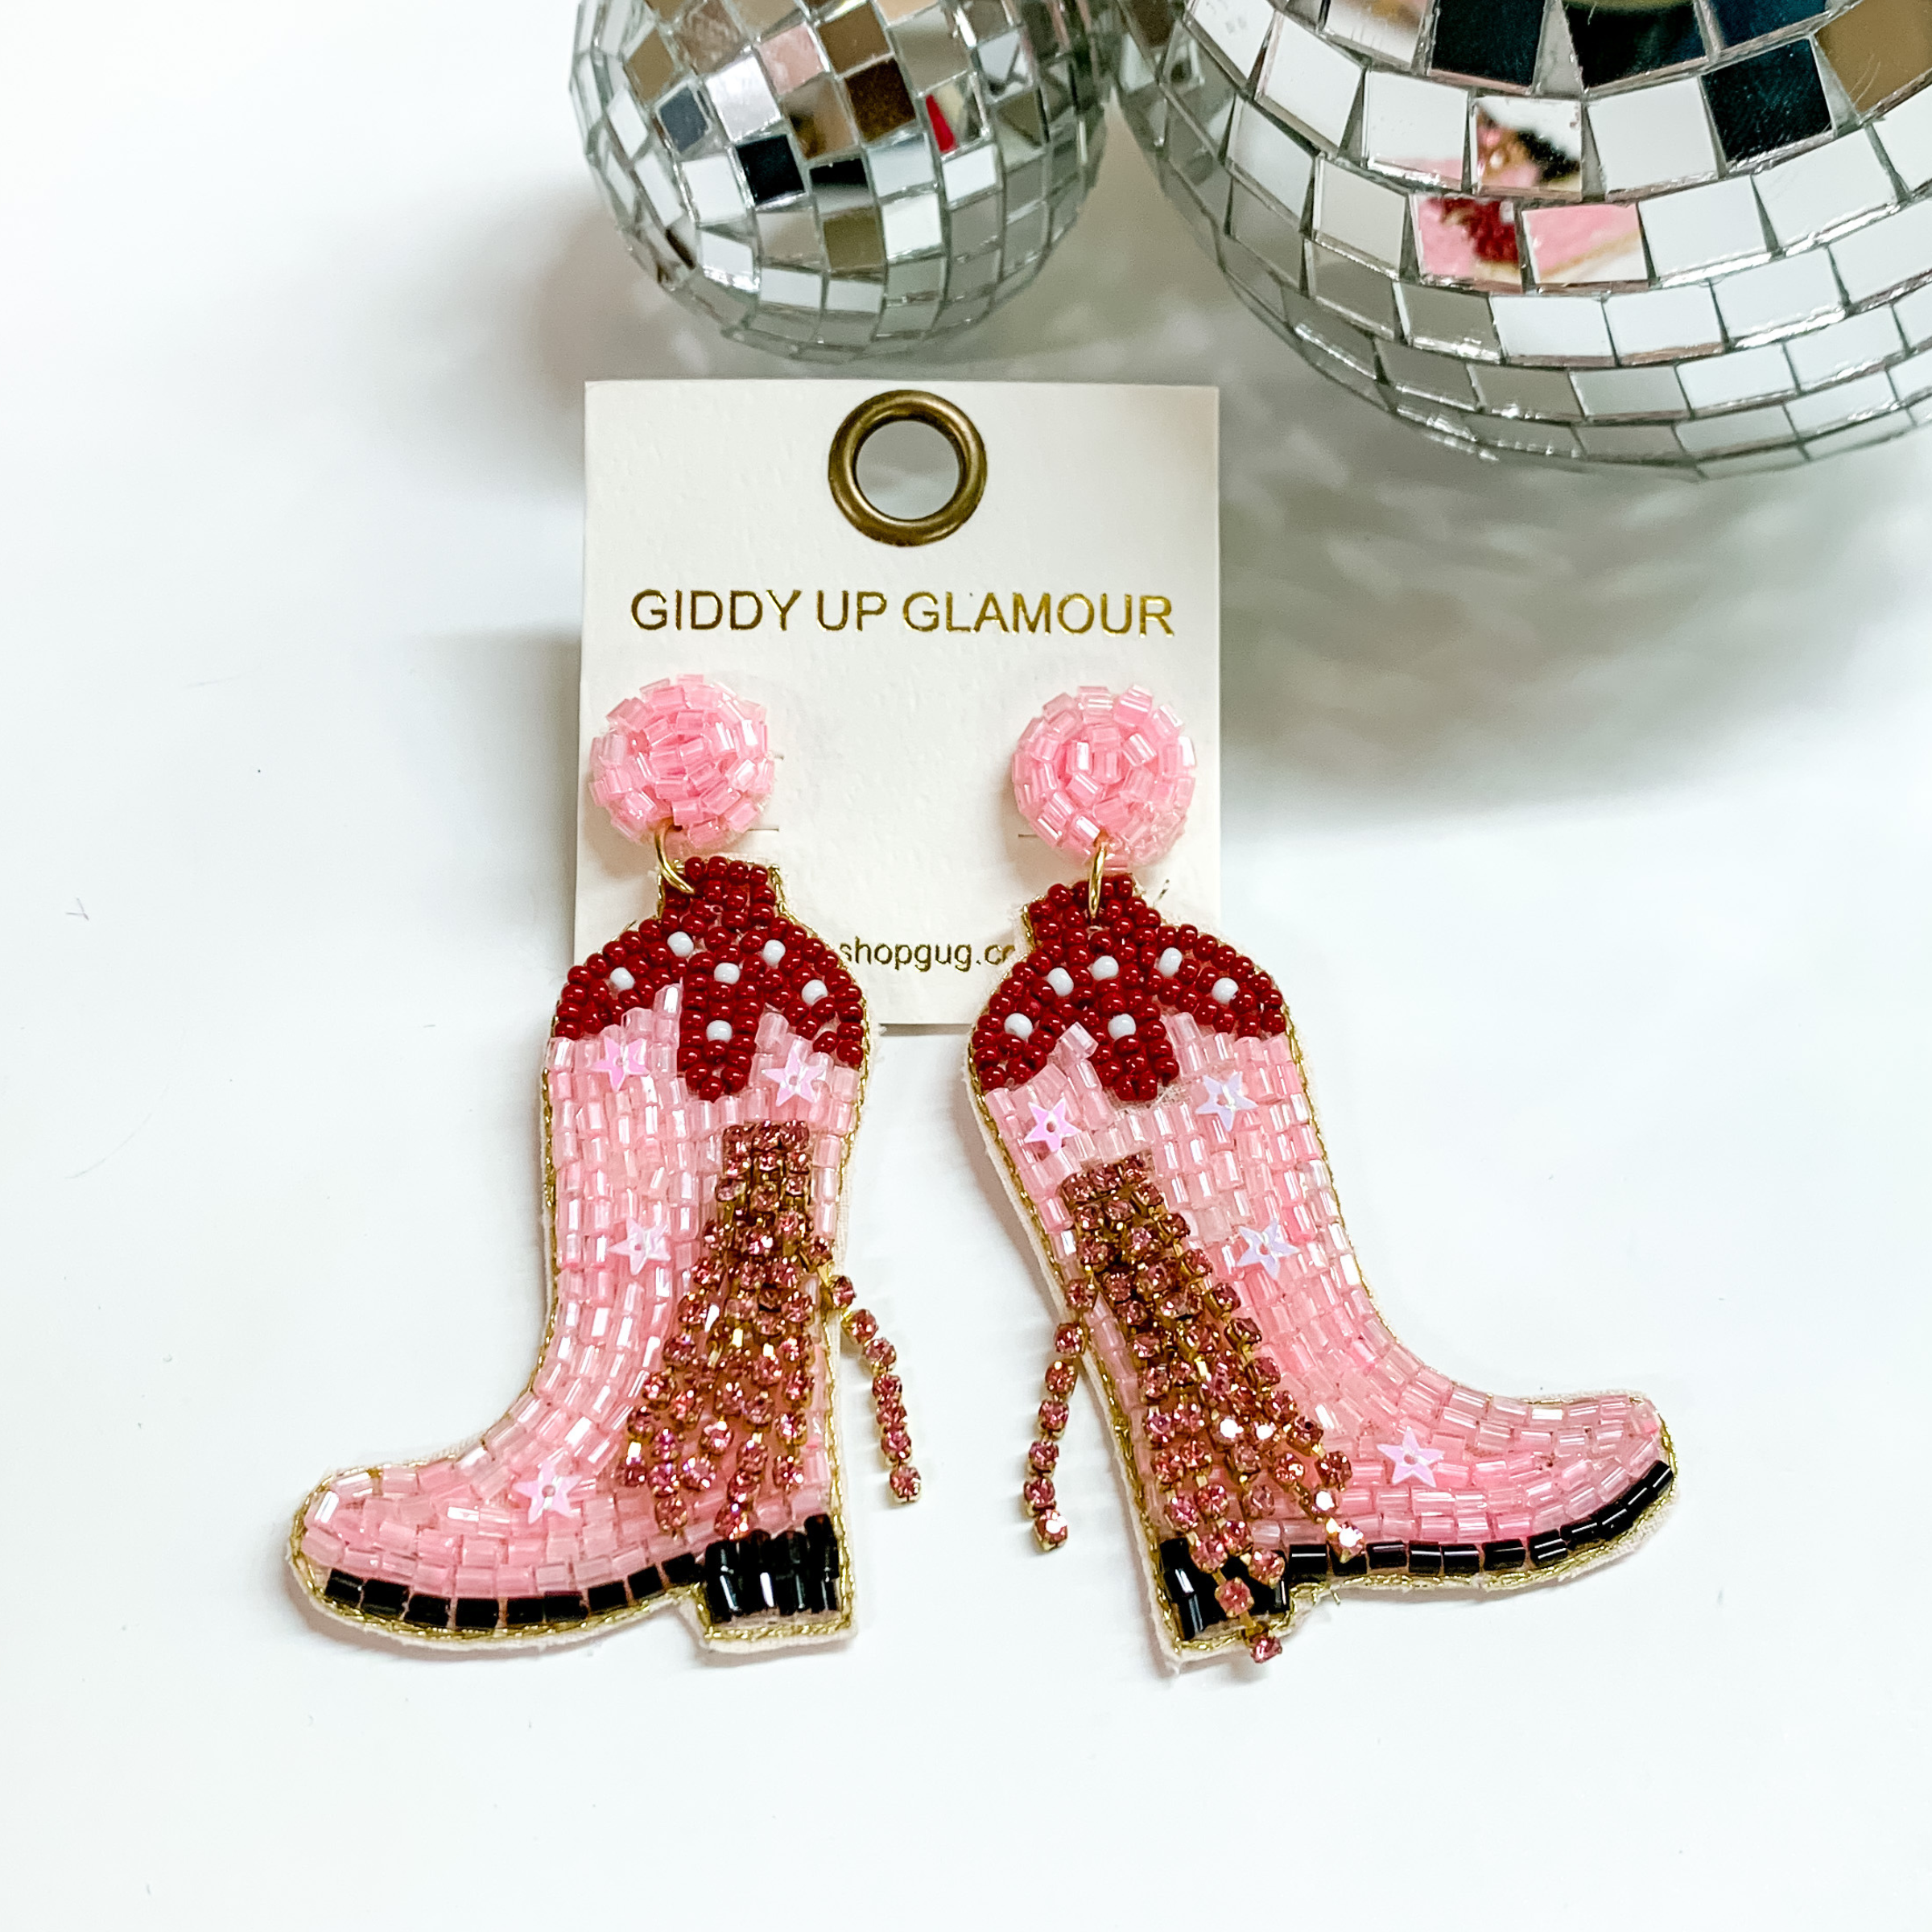 Pink beaded boot earrings with pink crystal tassels. These beaded earrings also include a dark pink top, black sole, and pink sequin stars throughout. These earrings are pictured on a white background with disco balls at the top.